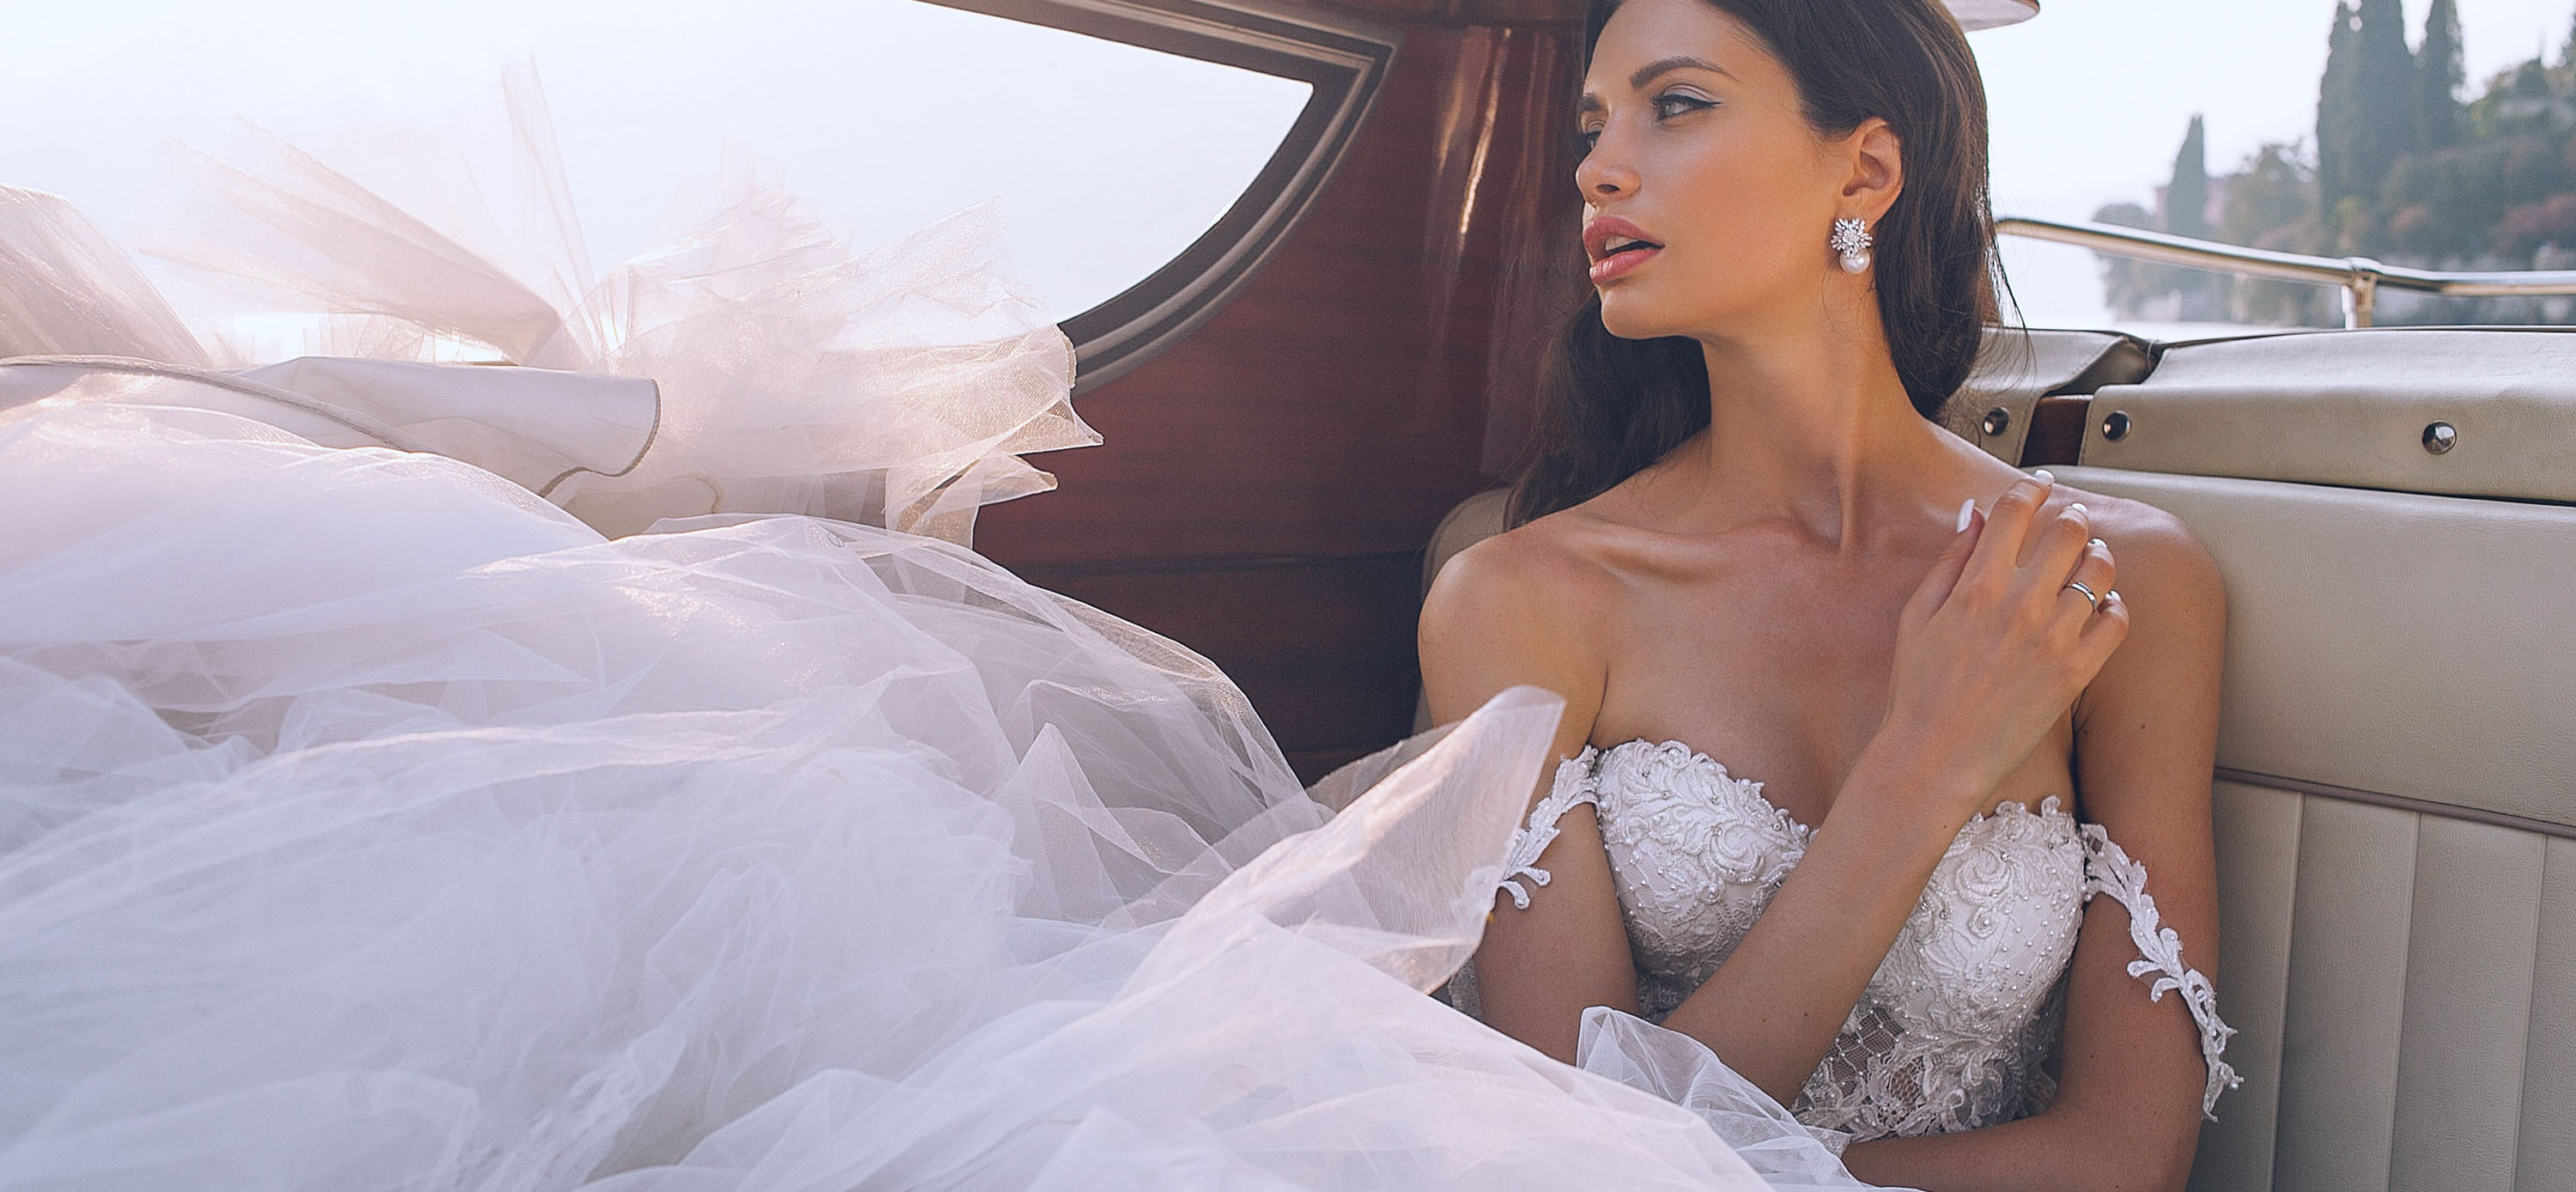 Best bridal gowns as we enter the new year – My Wedding – For